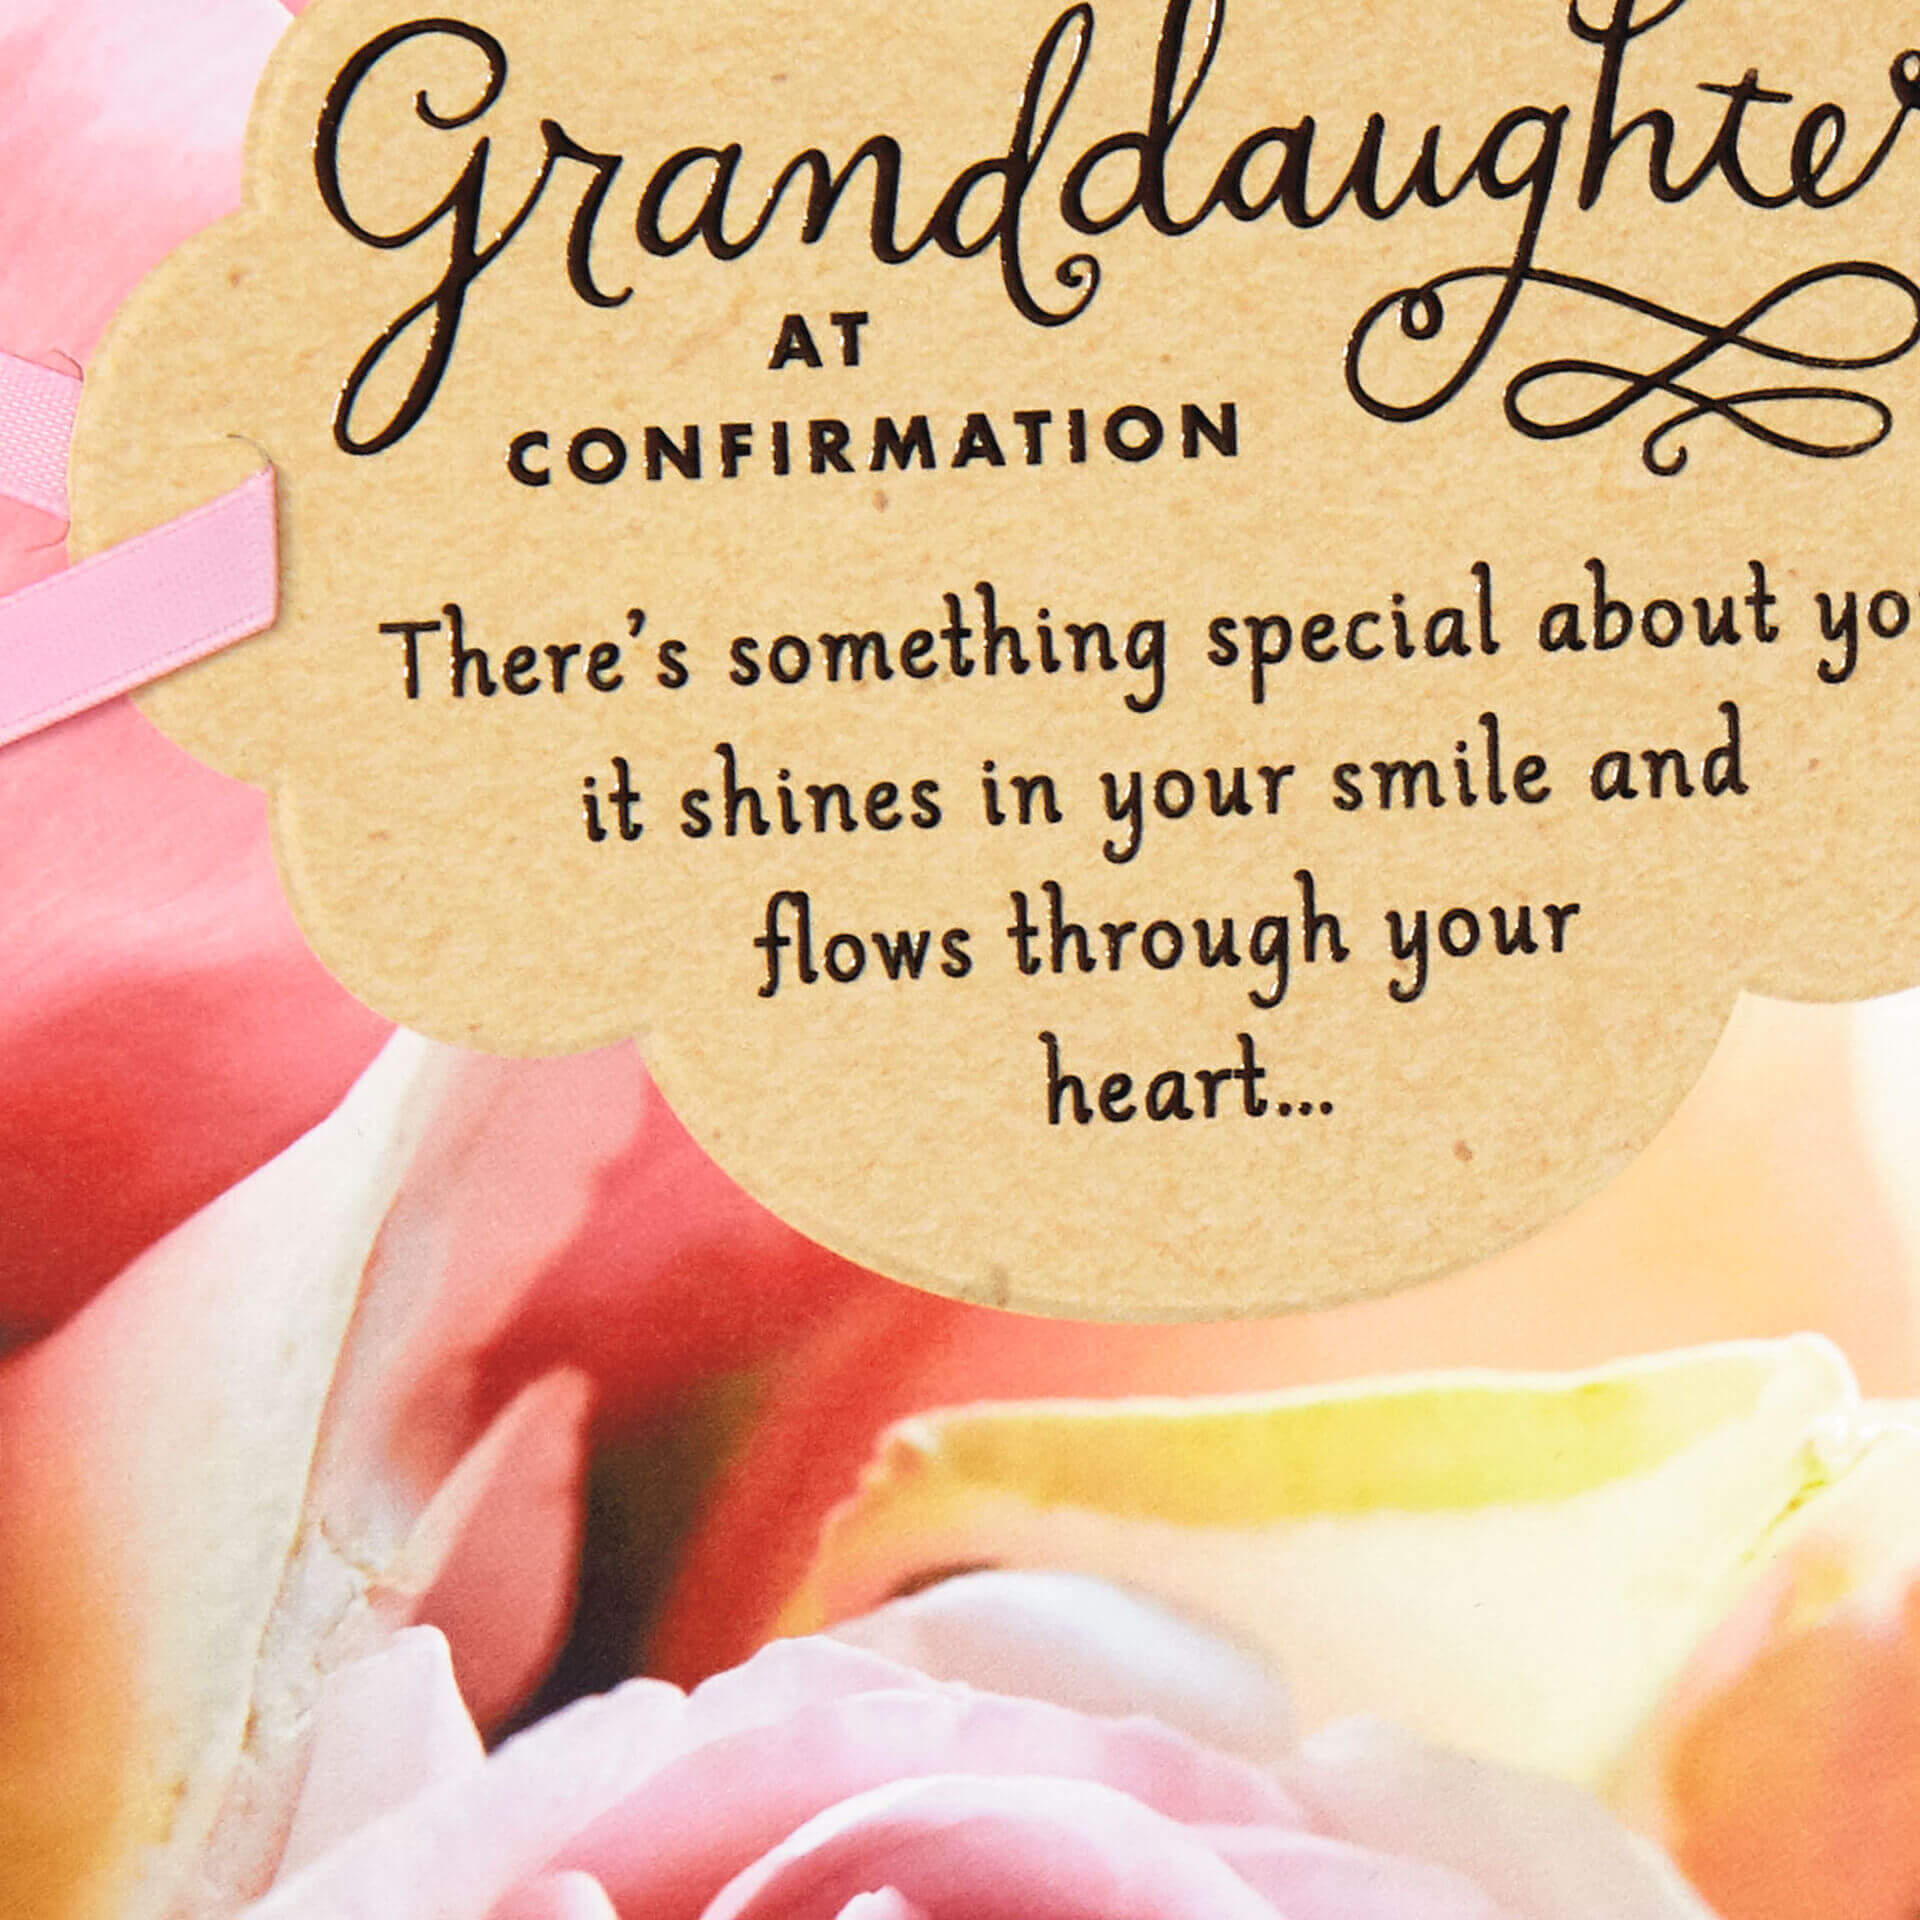 7+ Confirmation Wishes For Granddaughter 90 LoveHome